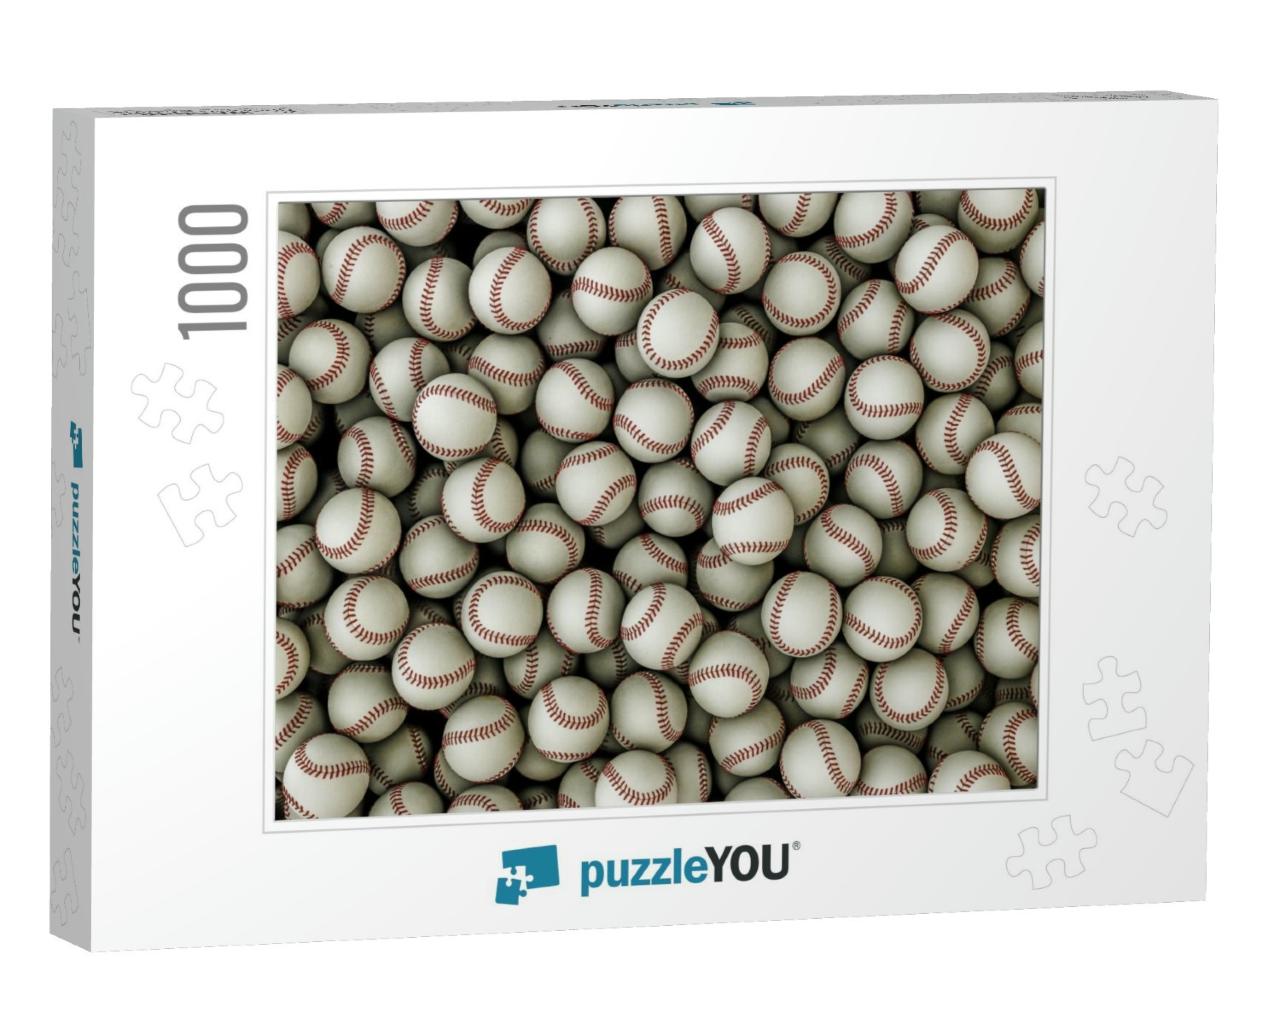 Baseballs Background... Jigsaw Puzzle with 1000 pieces